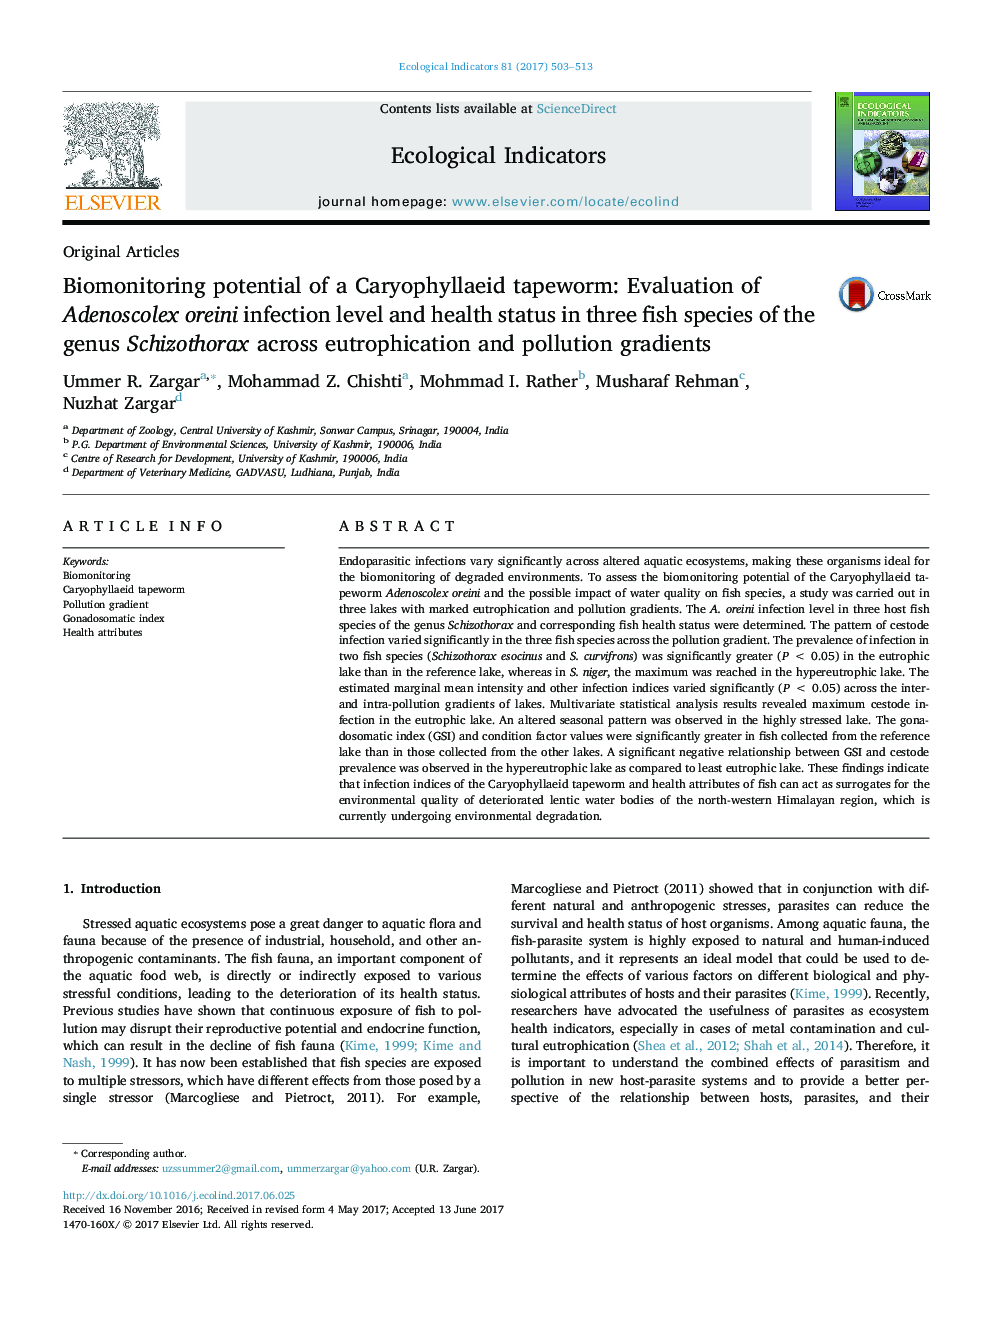 Biomonitoring potential of a Caryophyllaeid tapeworm: Evaluation of Adenoscolex oreini infection level and health status in three fish species of the genus Schizothorax across eutrophication and pollution gradients